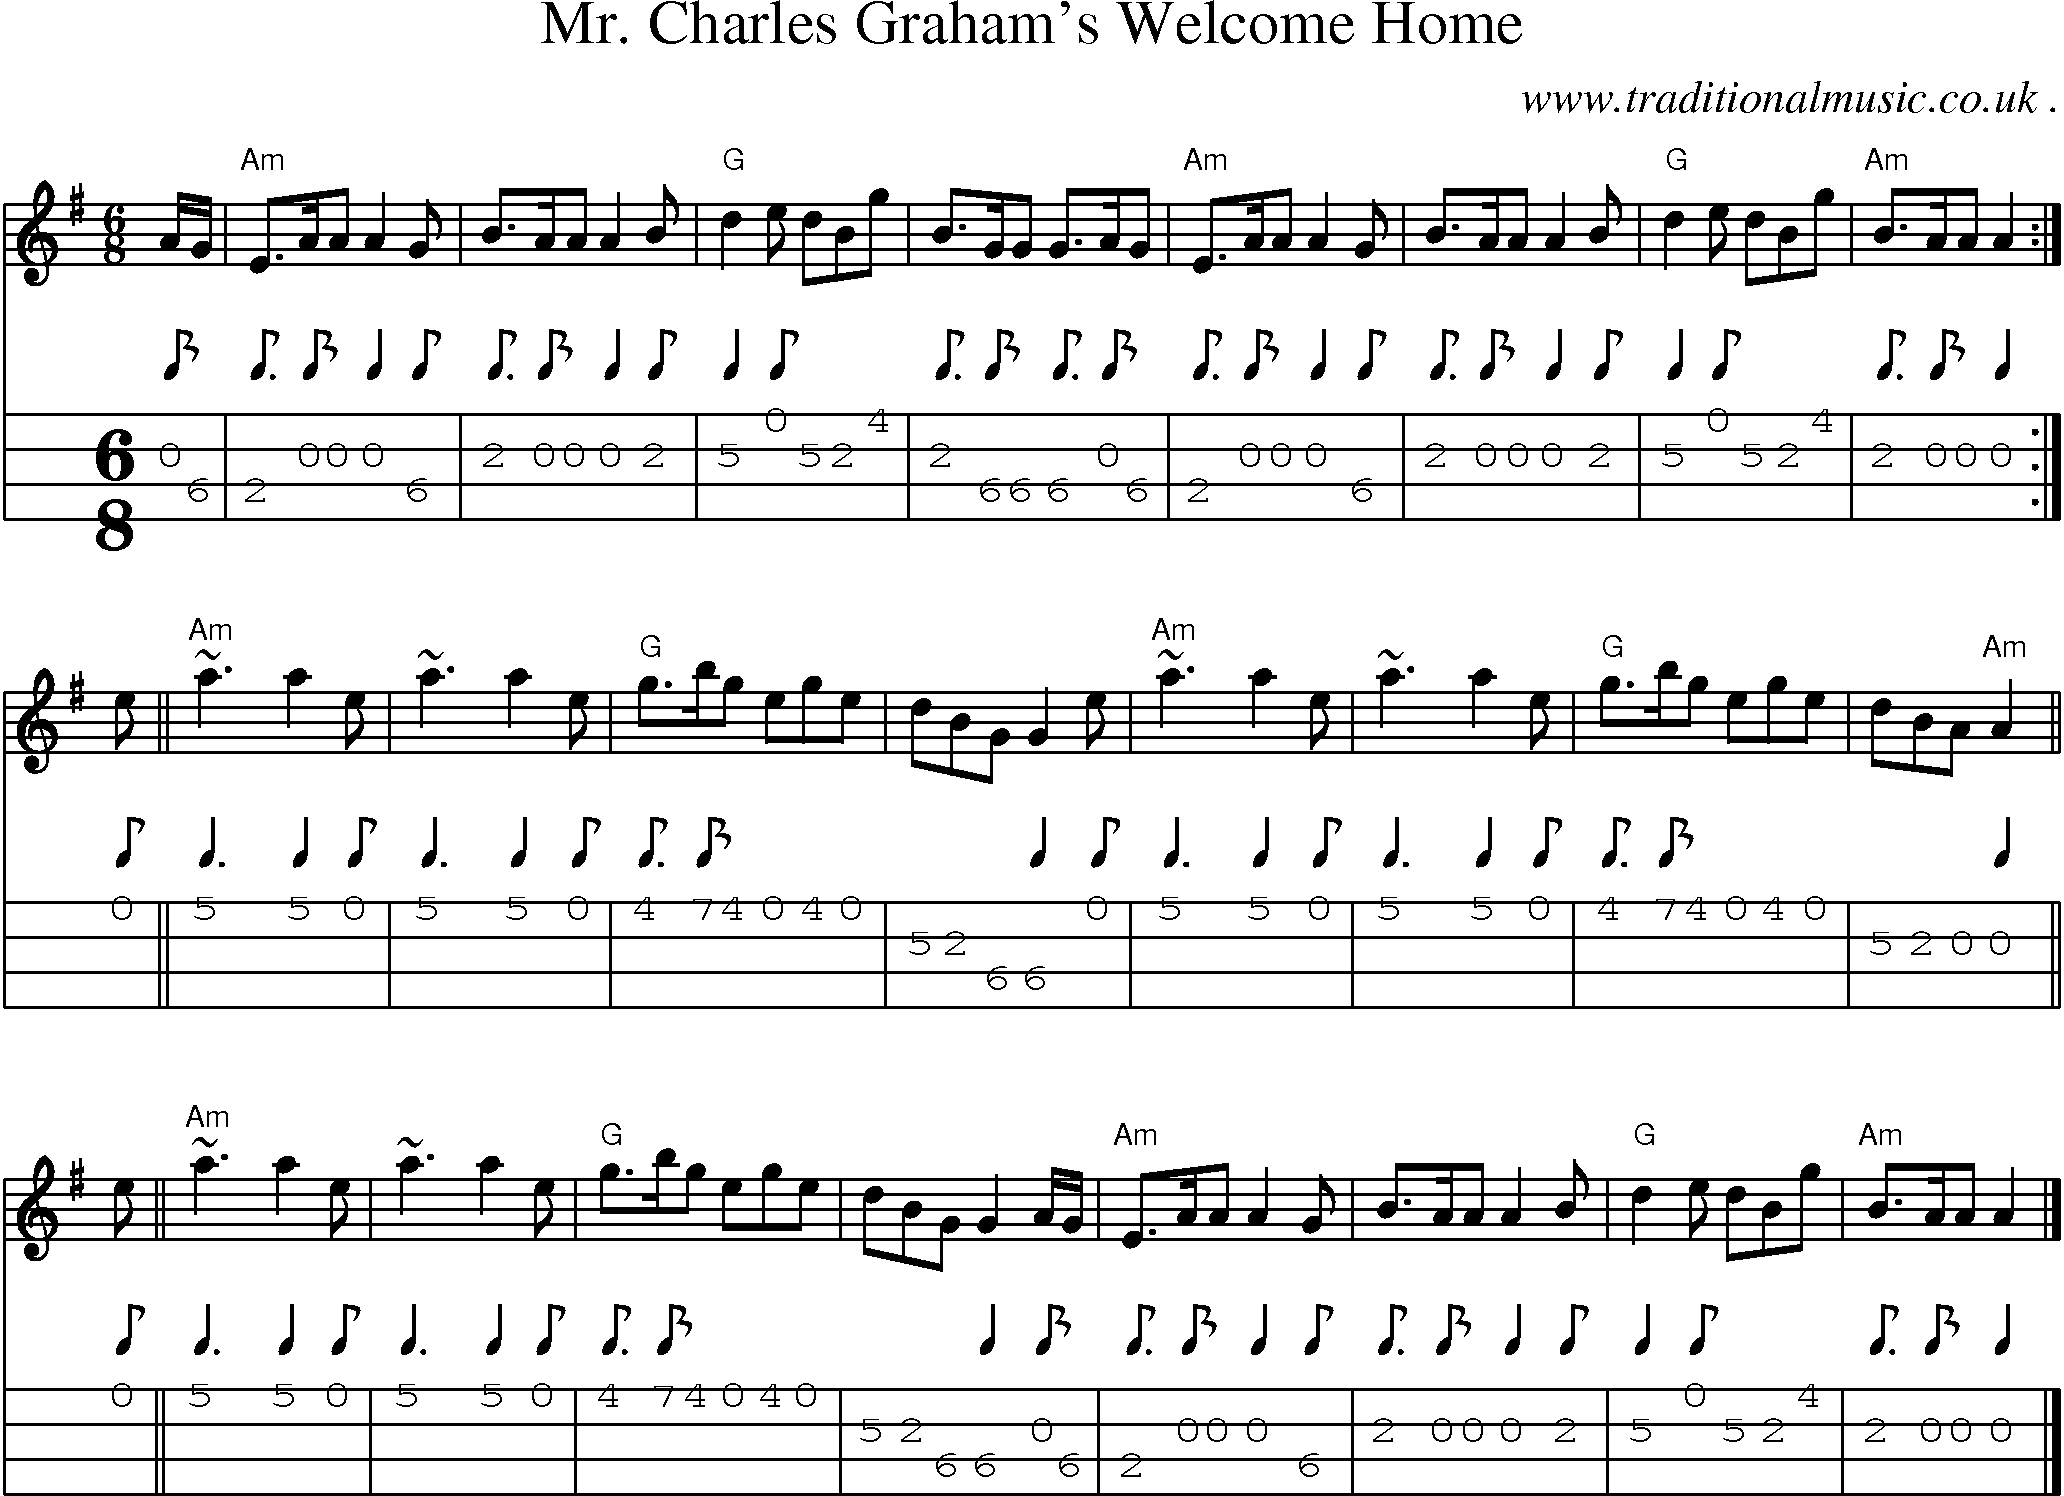 Sheet-music  score, Chords and Mandolin Tabs for Mr Charles Grahams Welcome Home